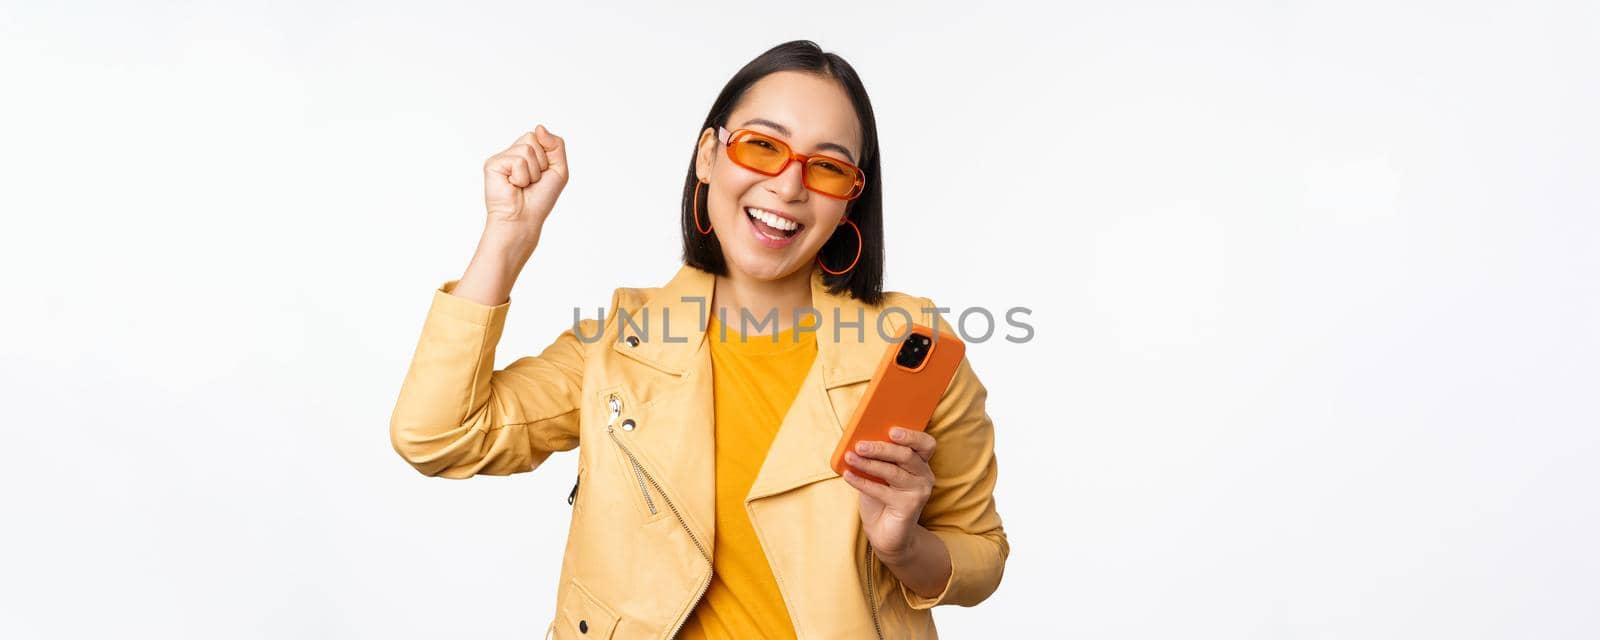 Enthusiastic korean girl in sunglasses, holding smartphone, celebrating and dancing, laughing happy with mobile phone, standing over white background.